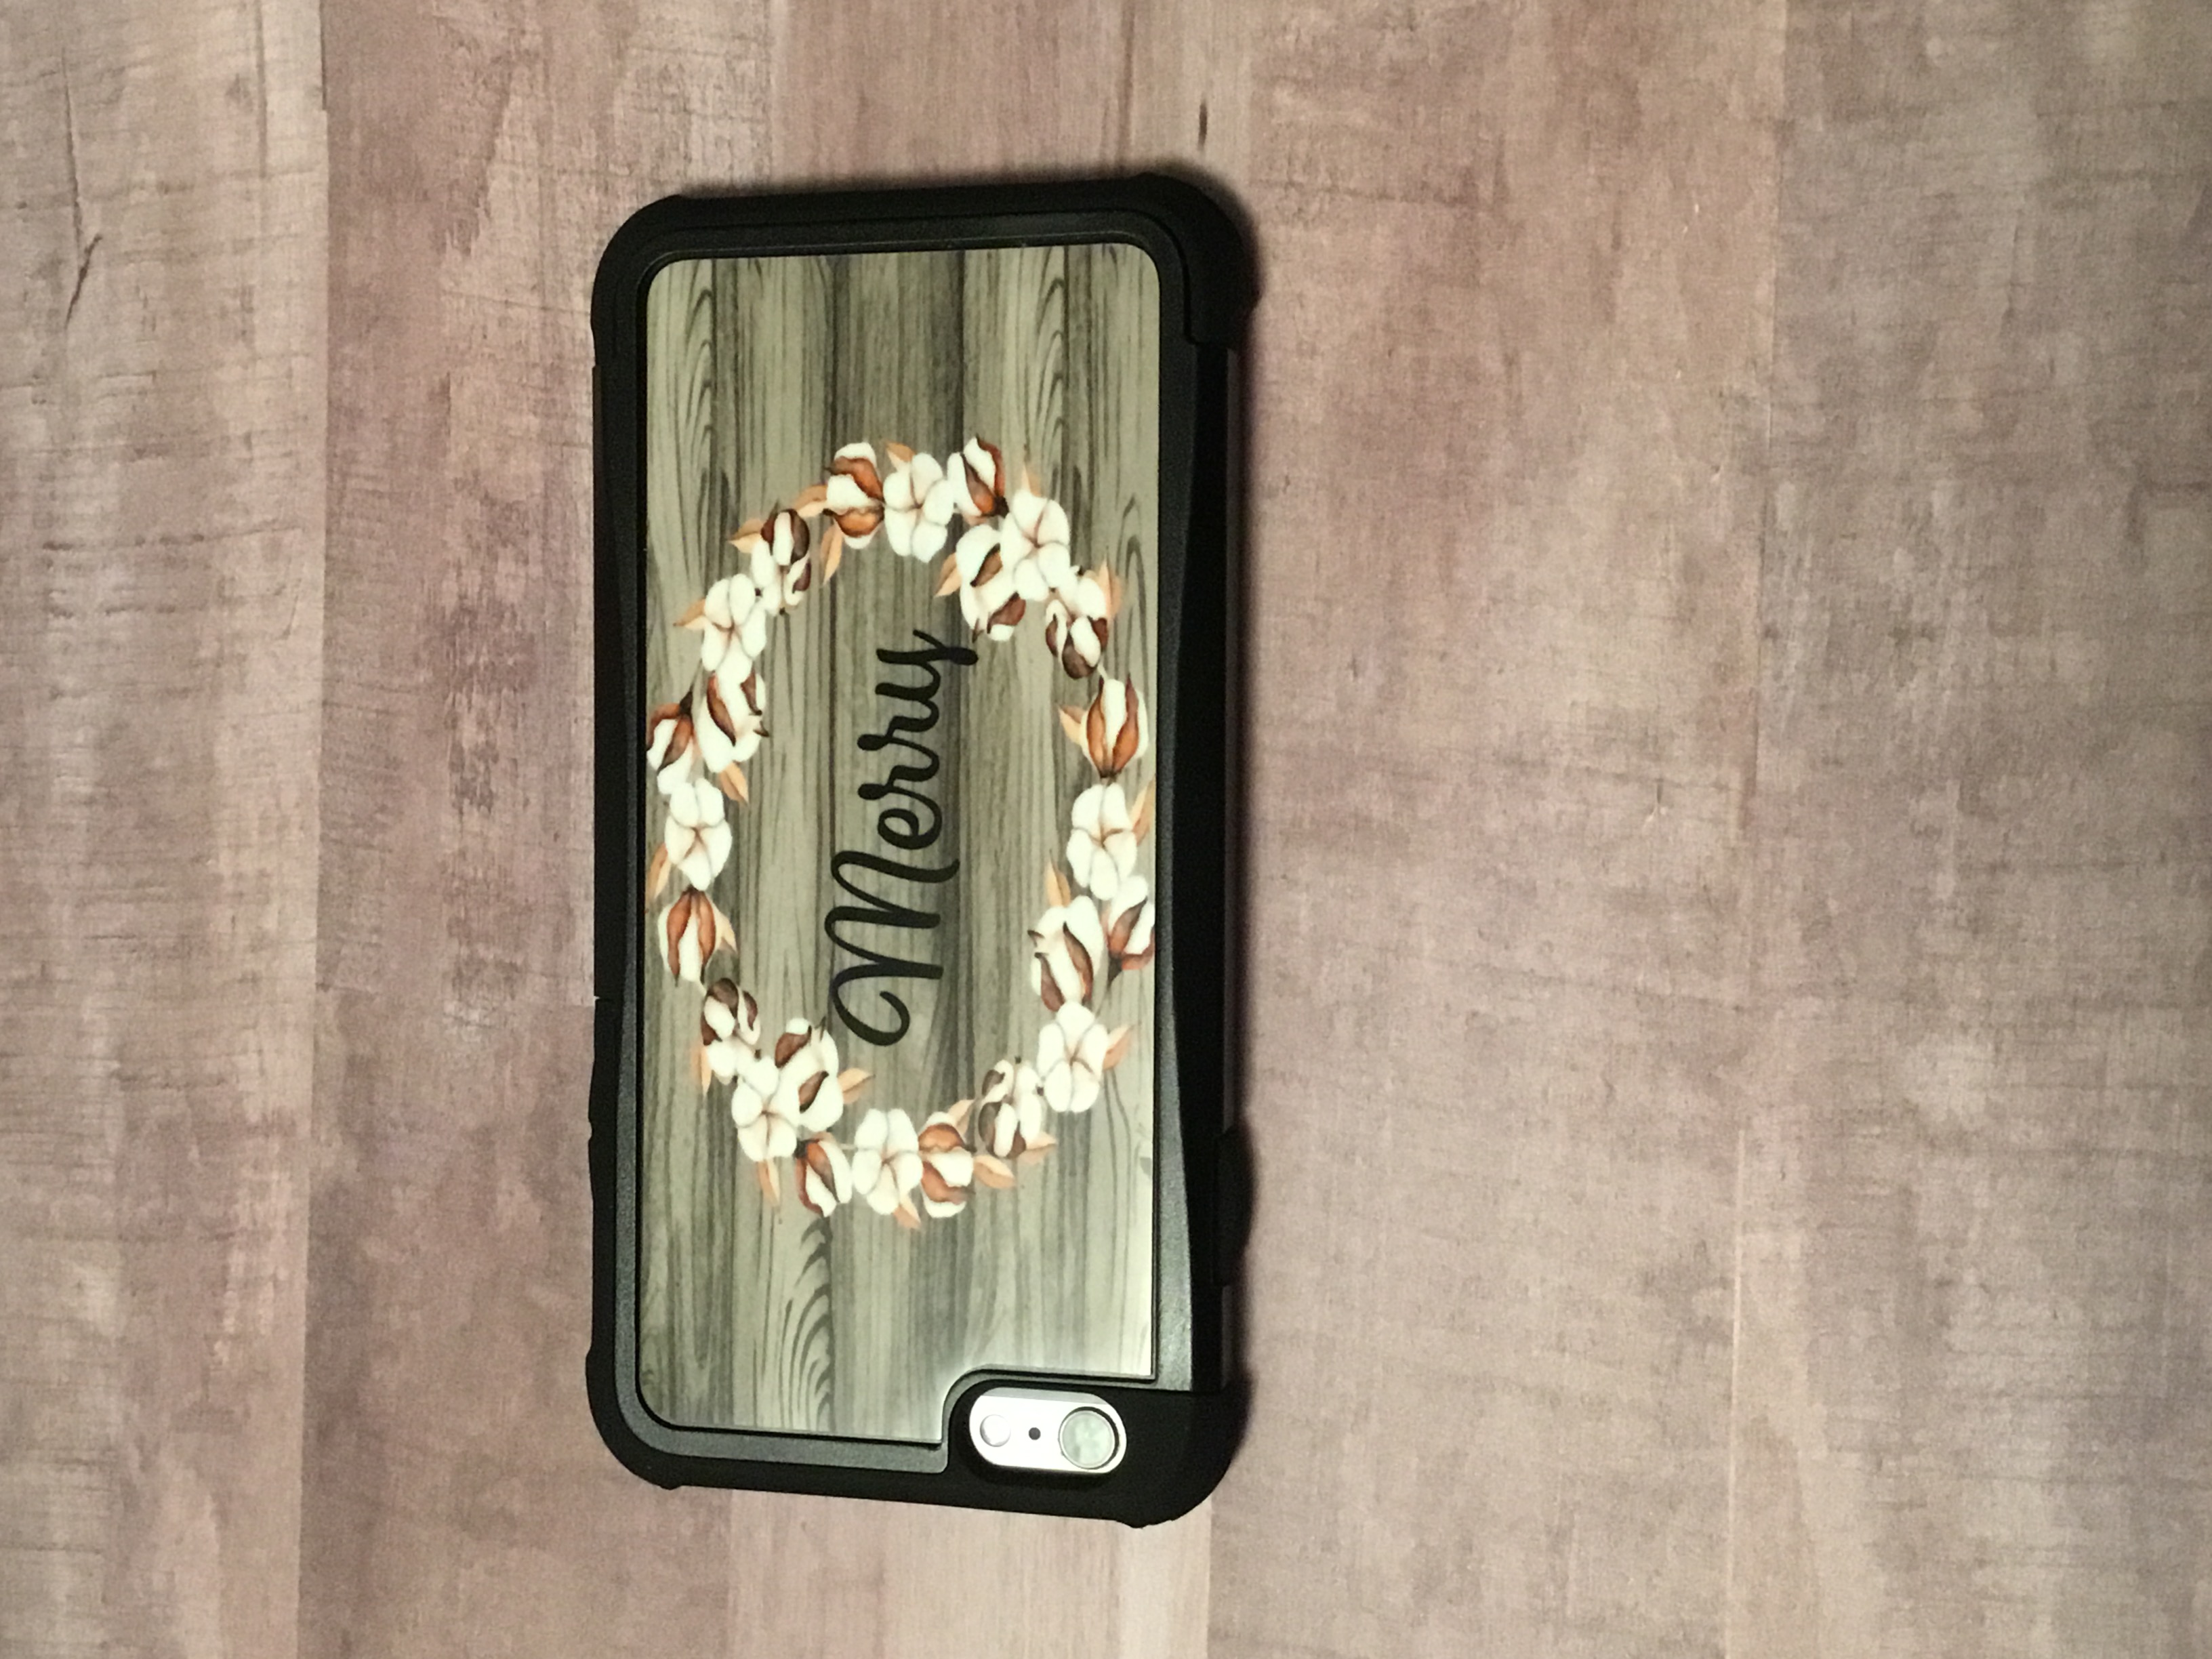 Itâ€™s sort of hard to find a nice phone case for older phones such as my iPhone 6+, so I creat